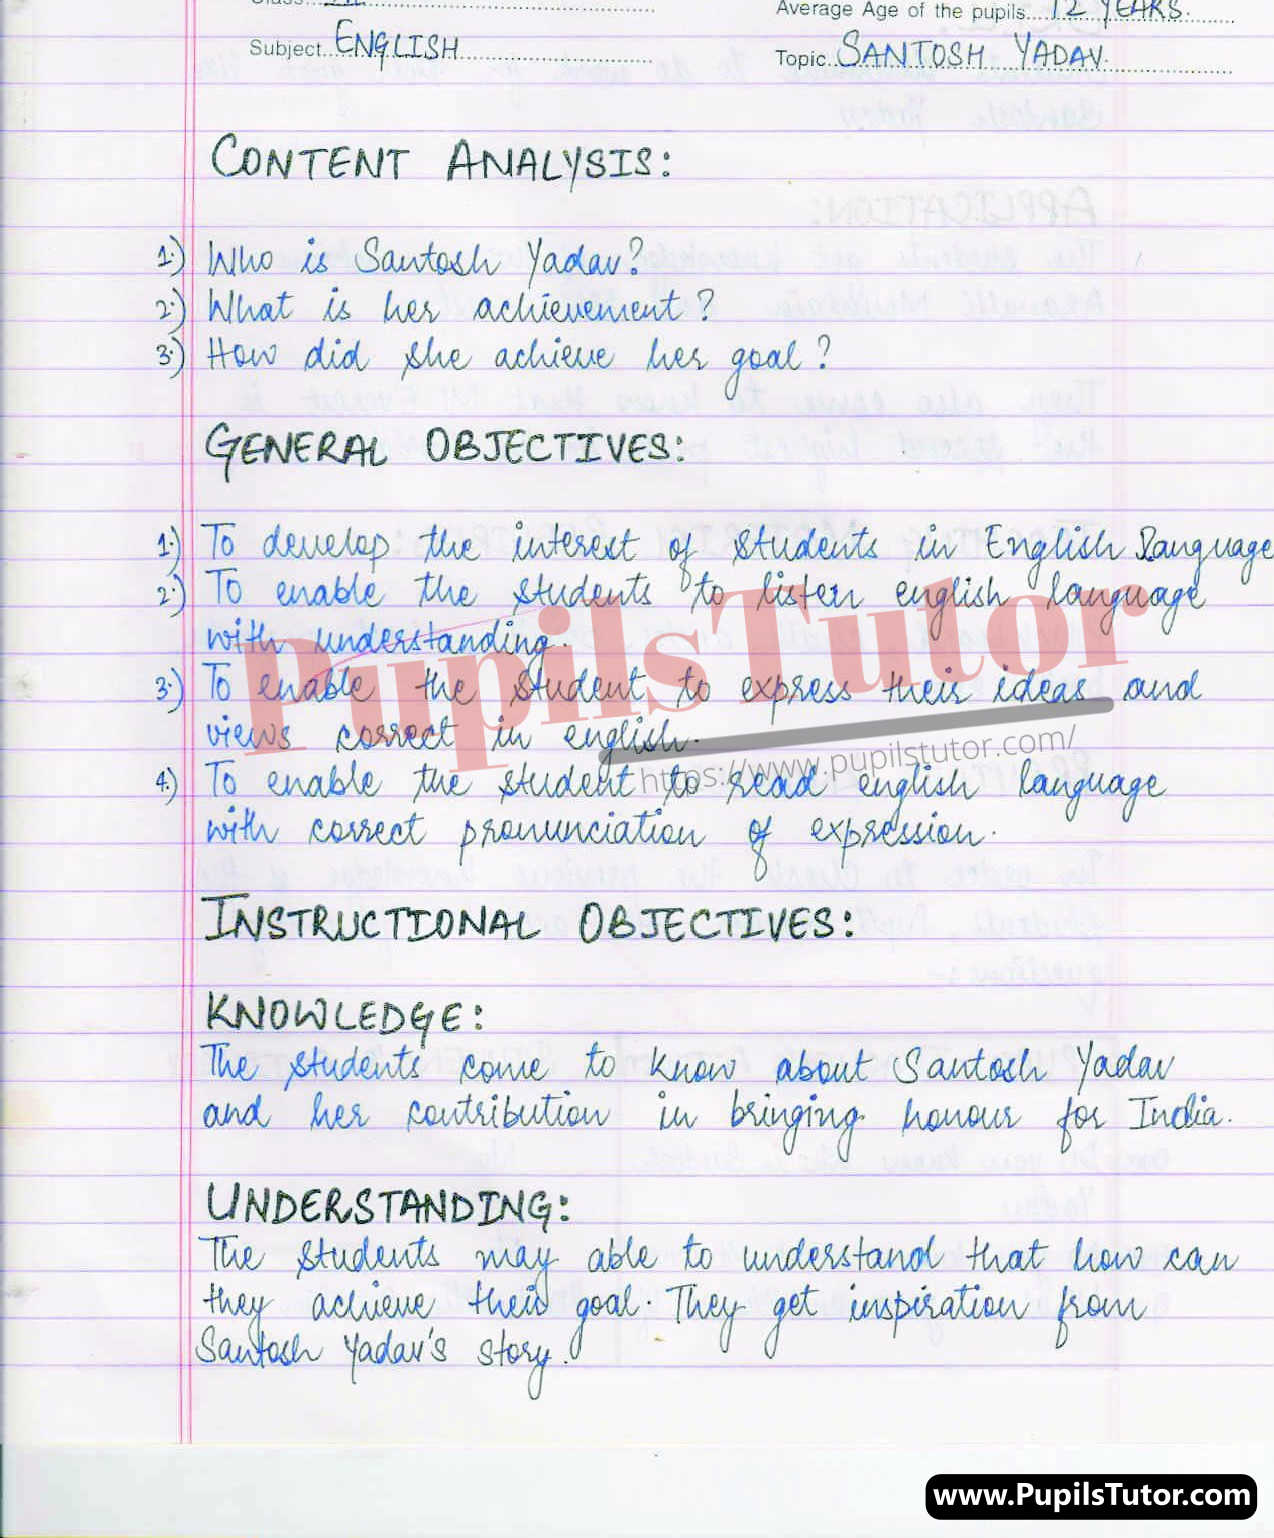 English Lesson Plan For Class 9 On Santosh Yadav – (Page And Image Number 1) – Pupils Tutor